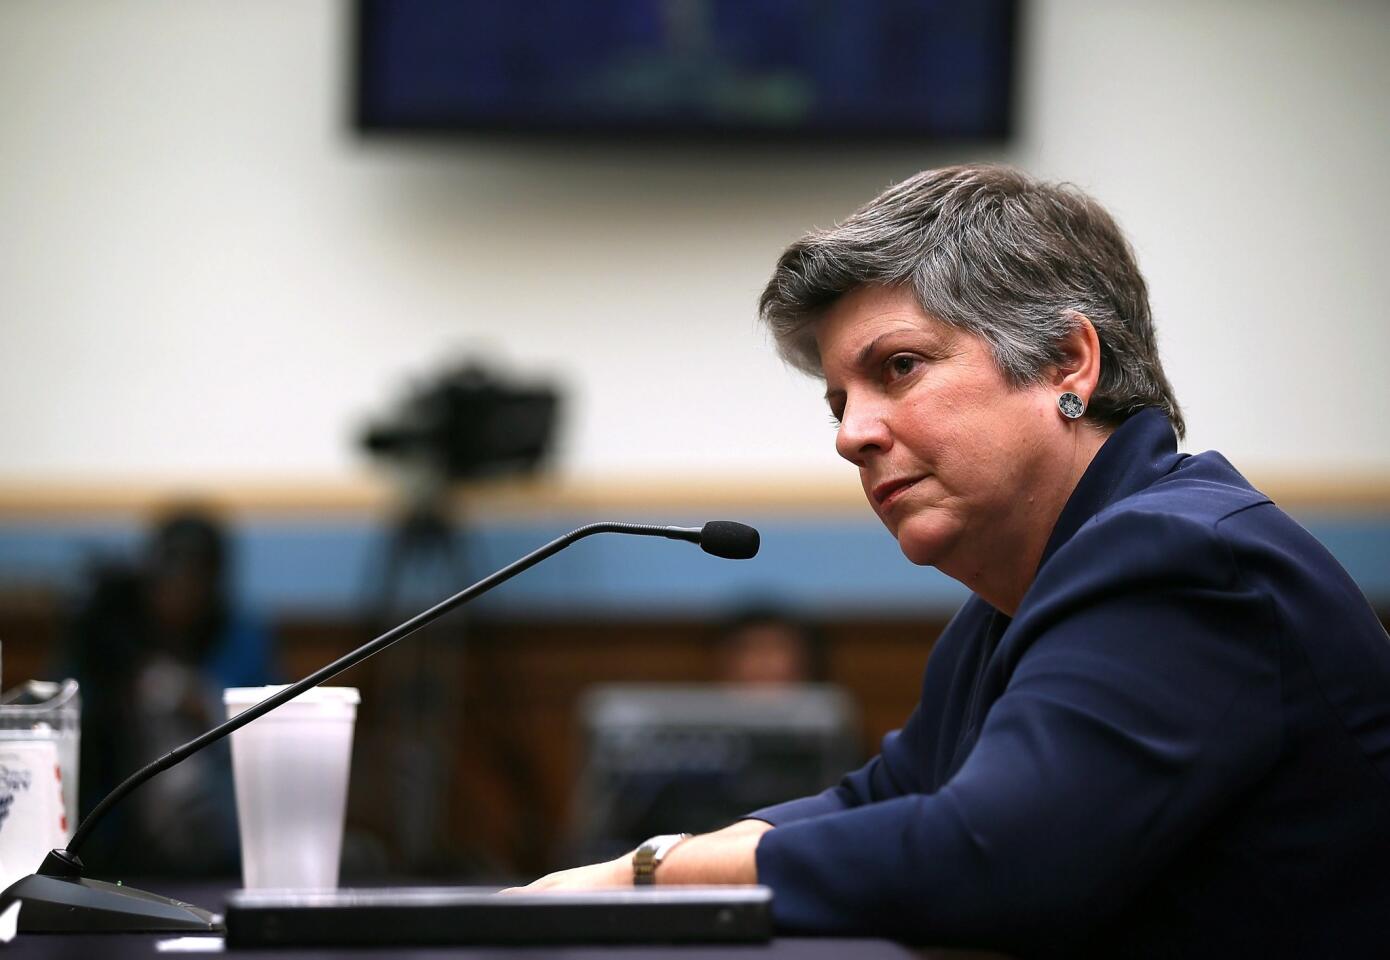 Secretary of Homeland Security Janet Napolitano announced her resignation in July 2013, intending to serve as president of the University of California system. She had served at her post since 2009, and previously was governor of Arizona from 2003 to 2009.